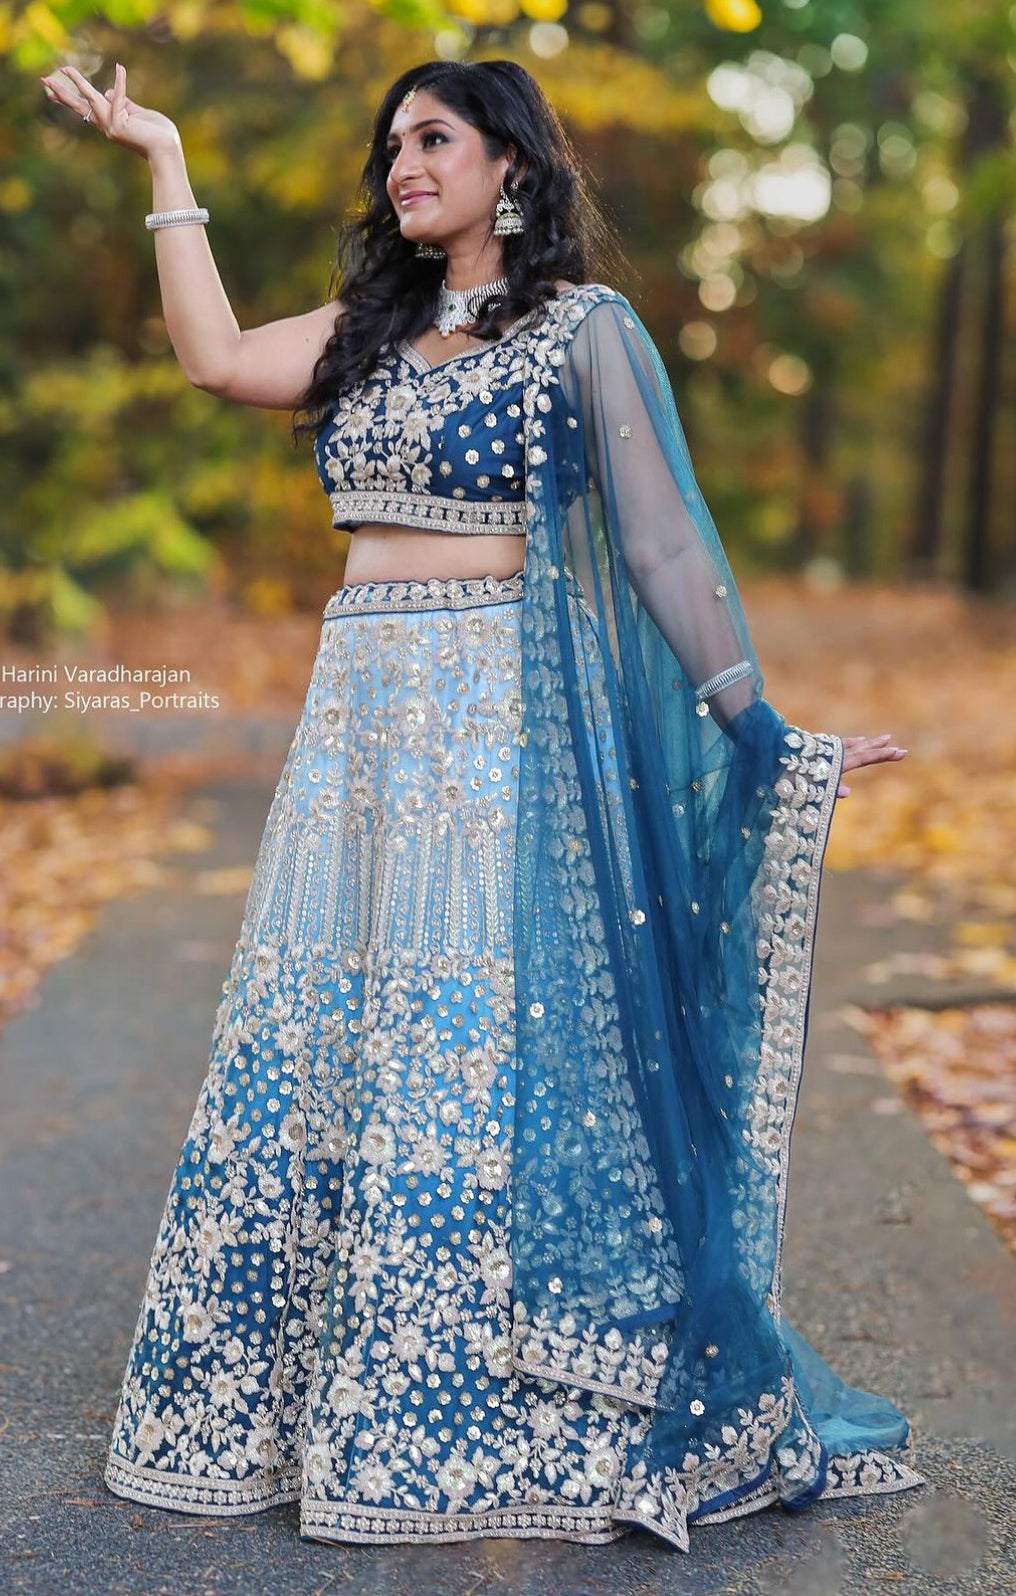 😍Bridal Lehanga 😍Wearing elegance like a crown and stunning portrayal of grace and sophistication. For Bridal Collections contact Siyaras Fashion House at 919-986-8387.